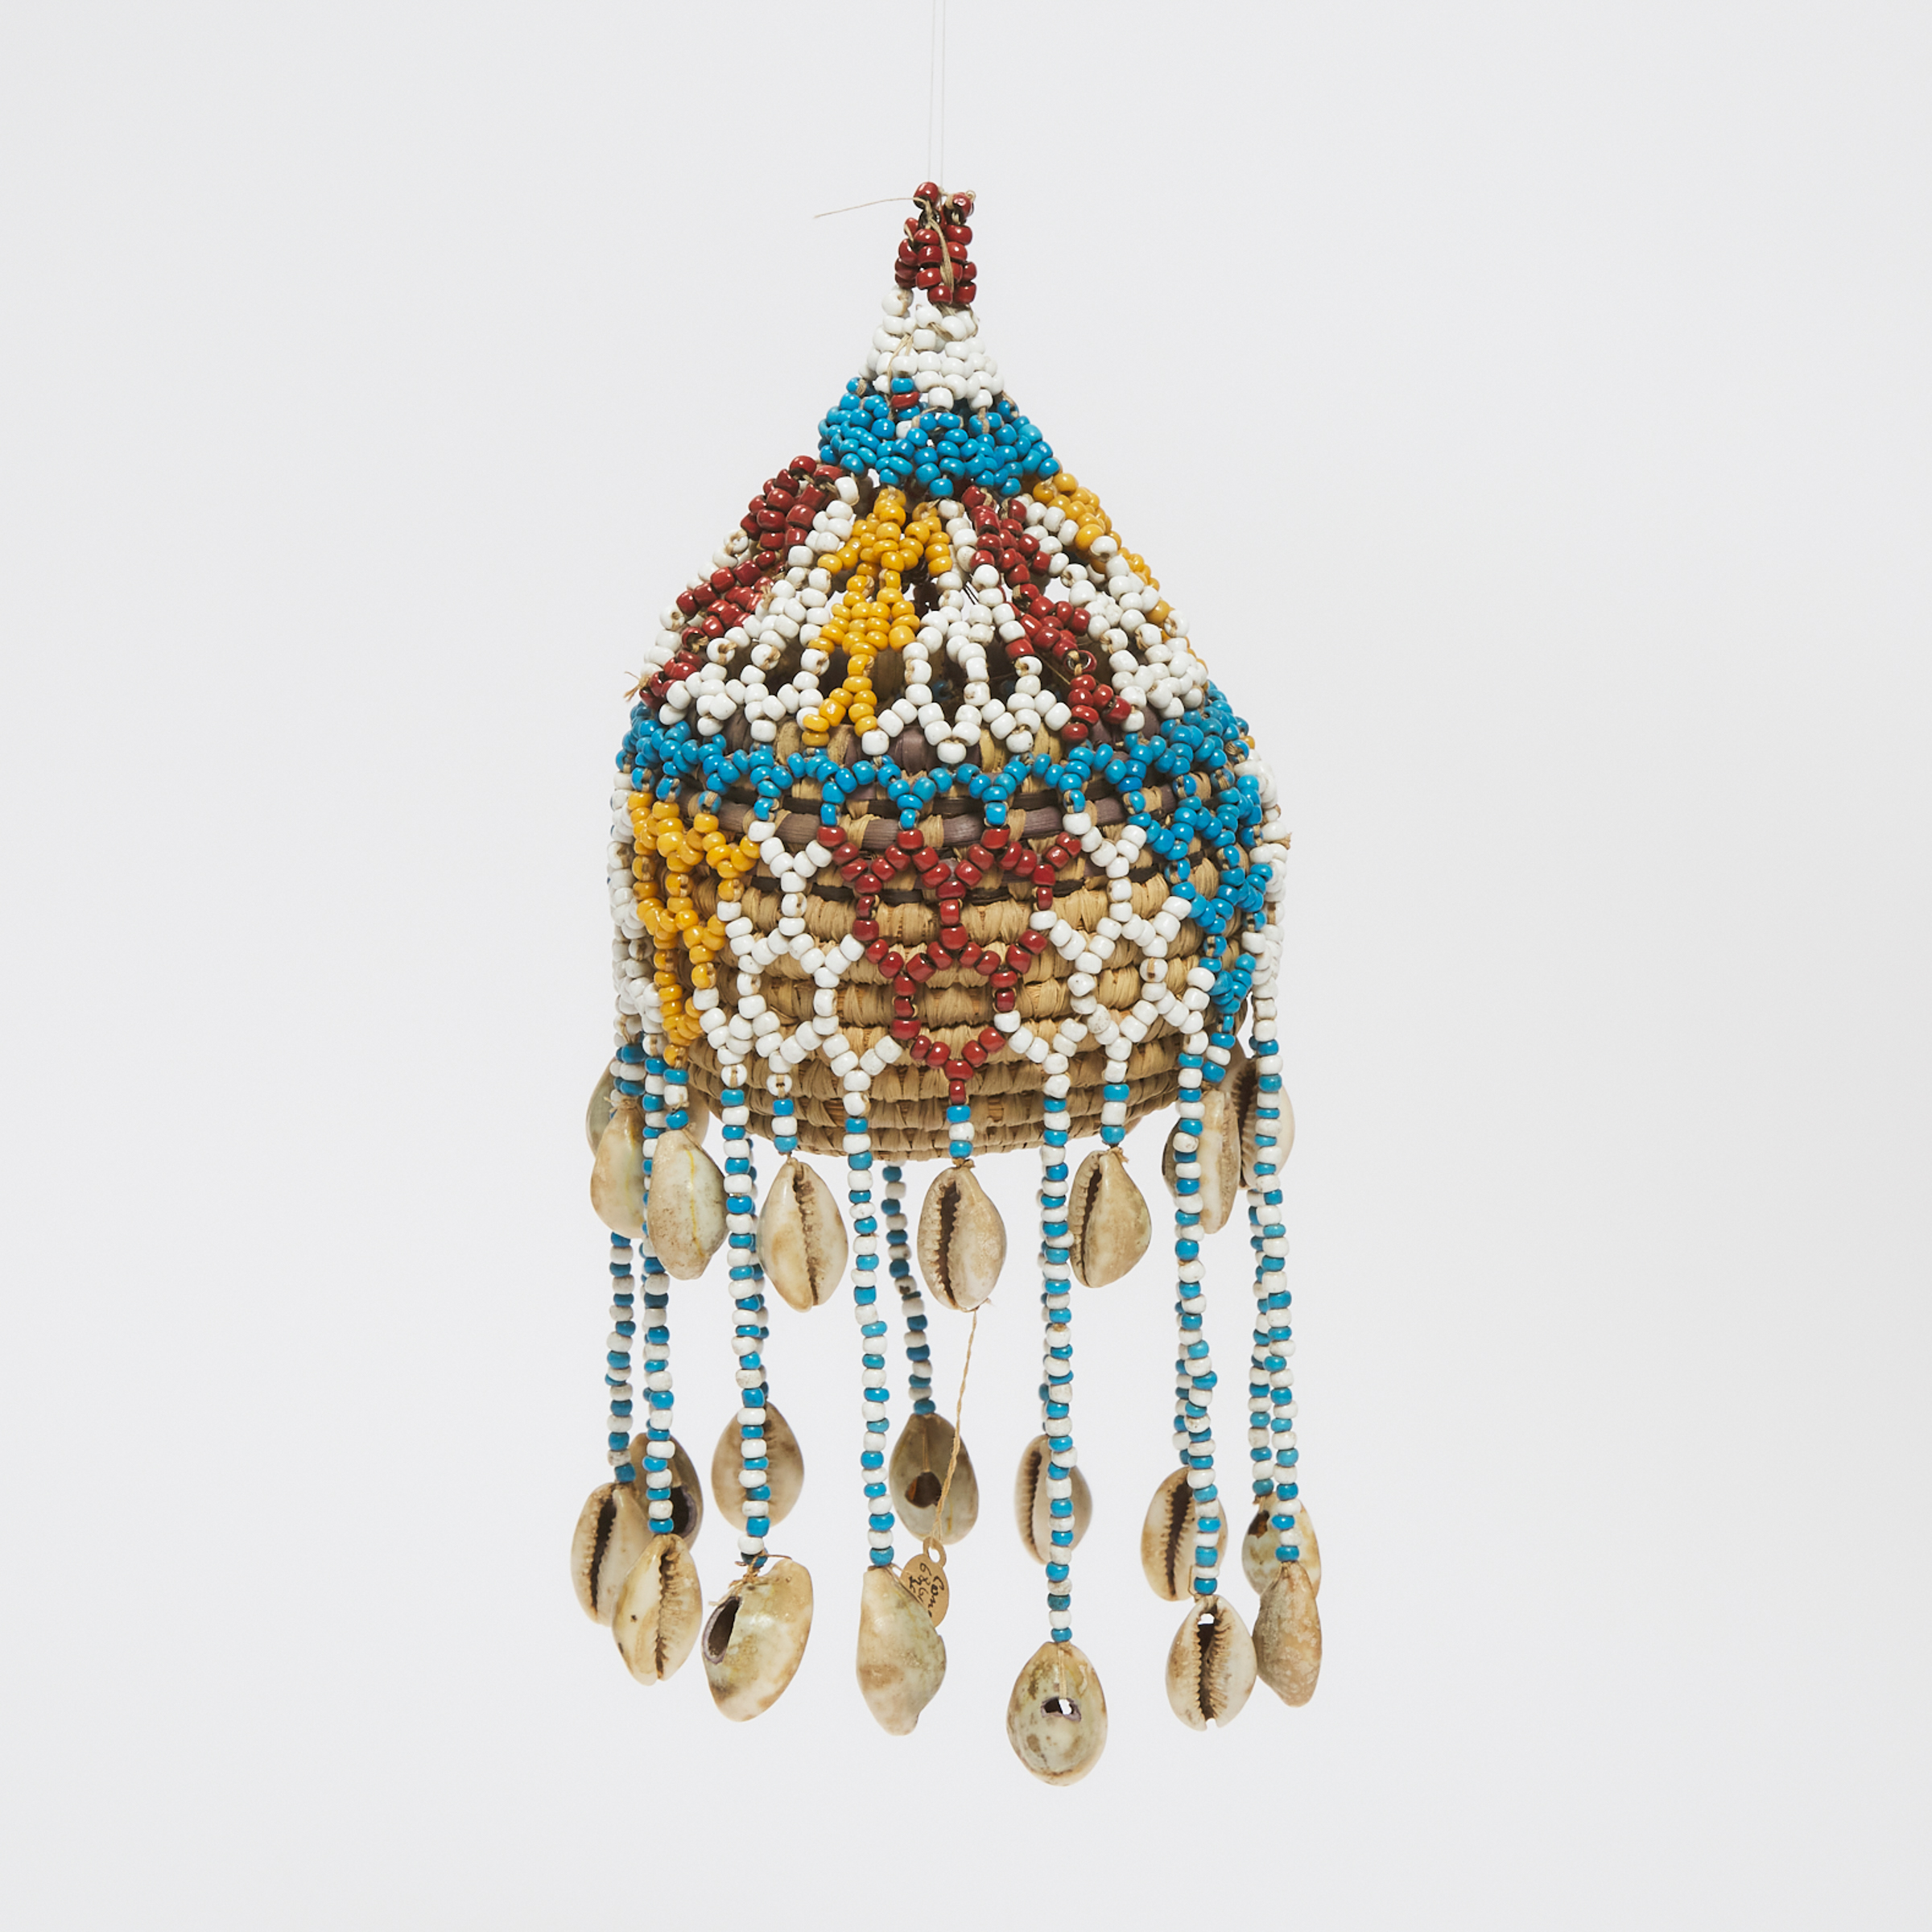 Kuba Woven Fiber and Beaded Basket with Cowrie Shell Drops, Democratic Republic of Congo, mid 20th century